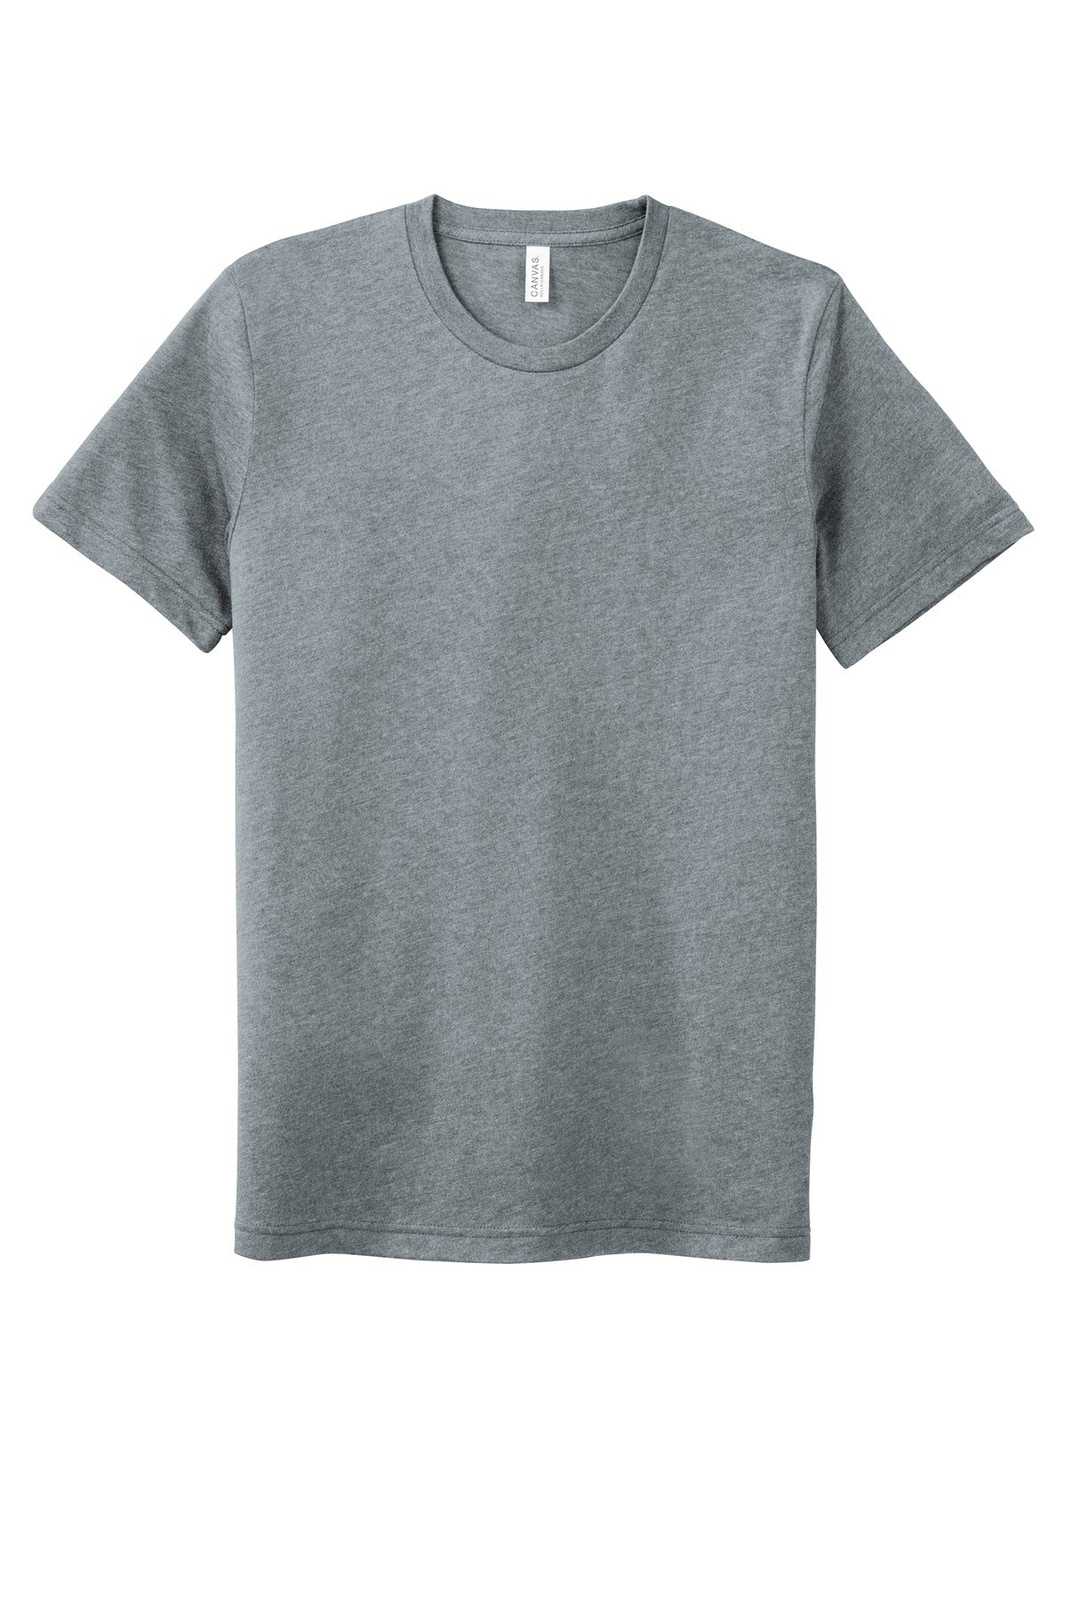 Bella + Canvas 3301 Unisex Sueded Tee - Athletic Heather - HIT a Double